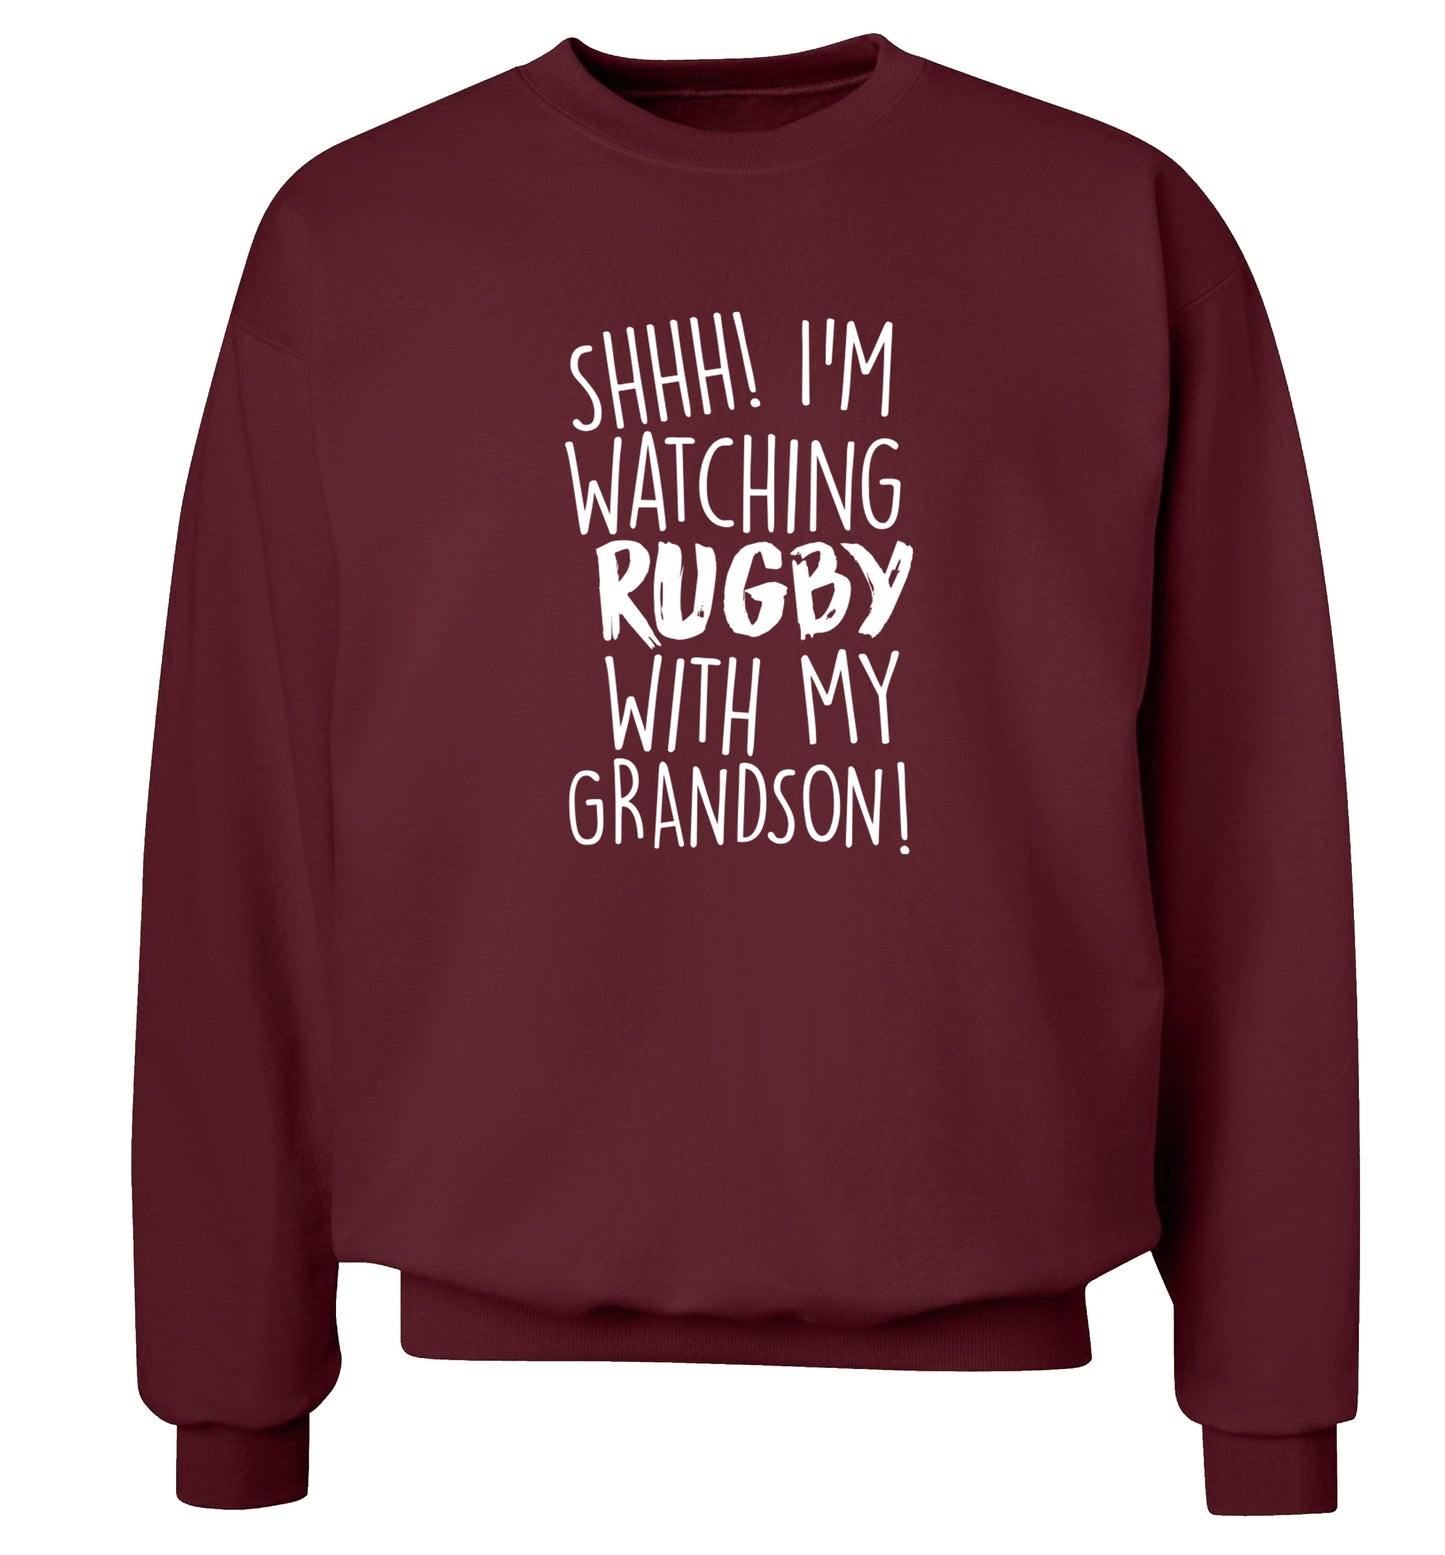 Shh I'm watching rugby with my grandson Adult's unisex maroon Sweater 2XL